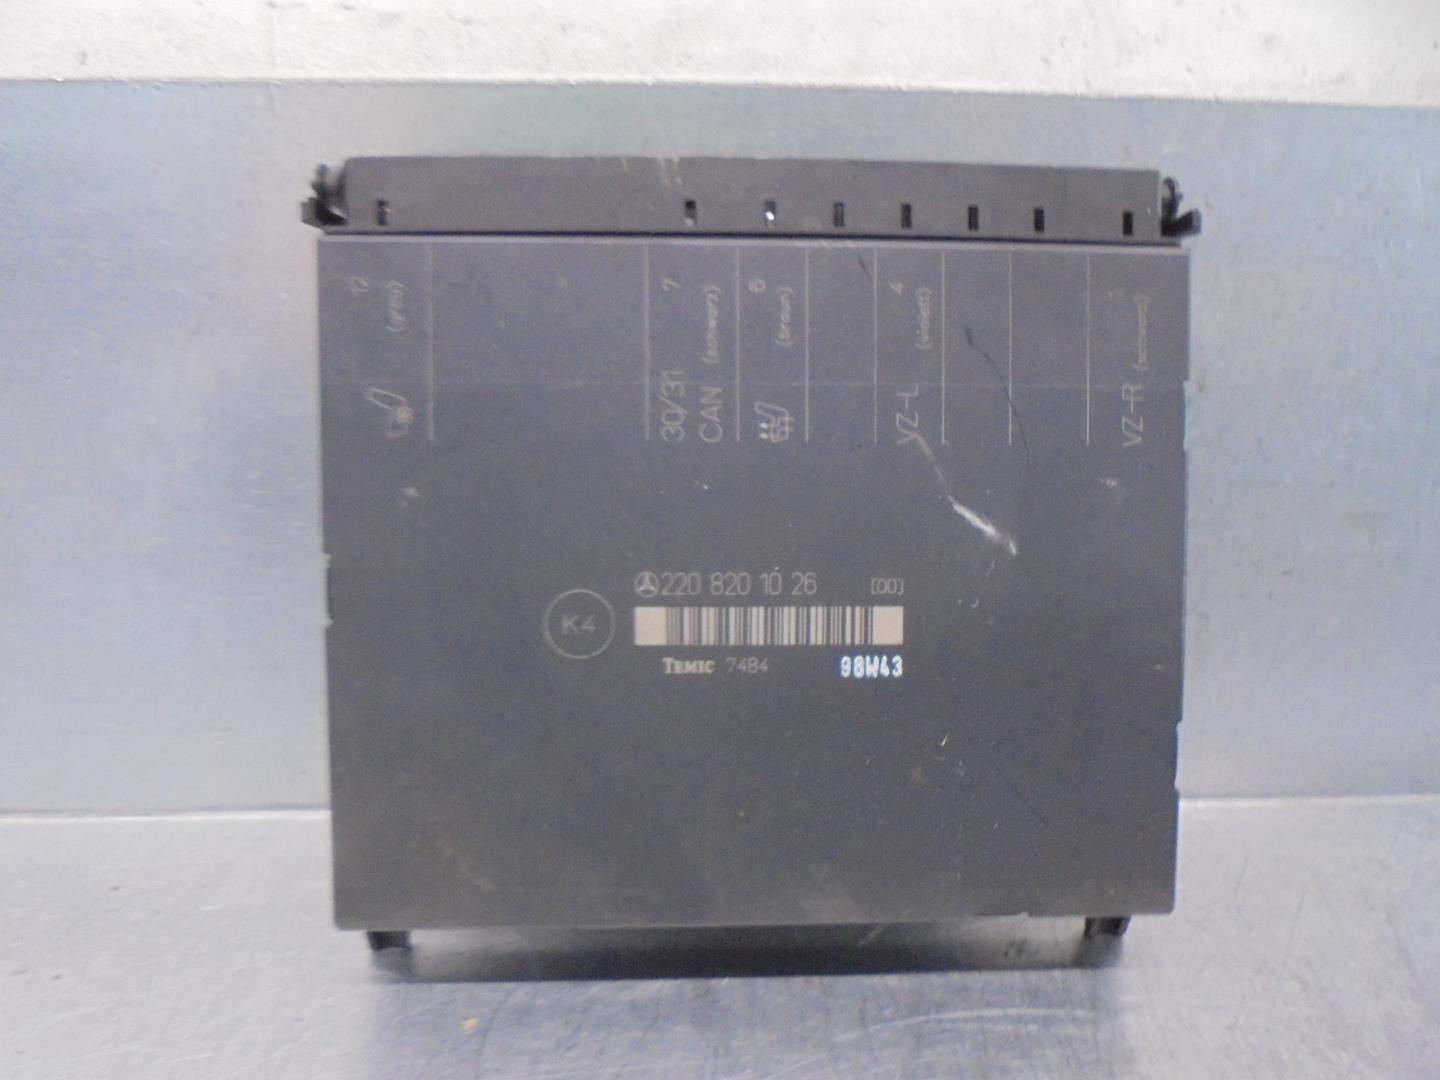 MERCEDES-BENZ S-Class W220 (1998-2005) Other Control Units 2208201026, 7484, TEMIC 21722745